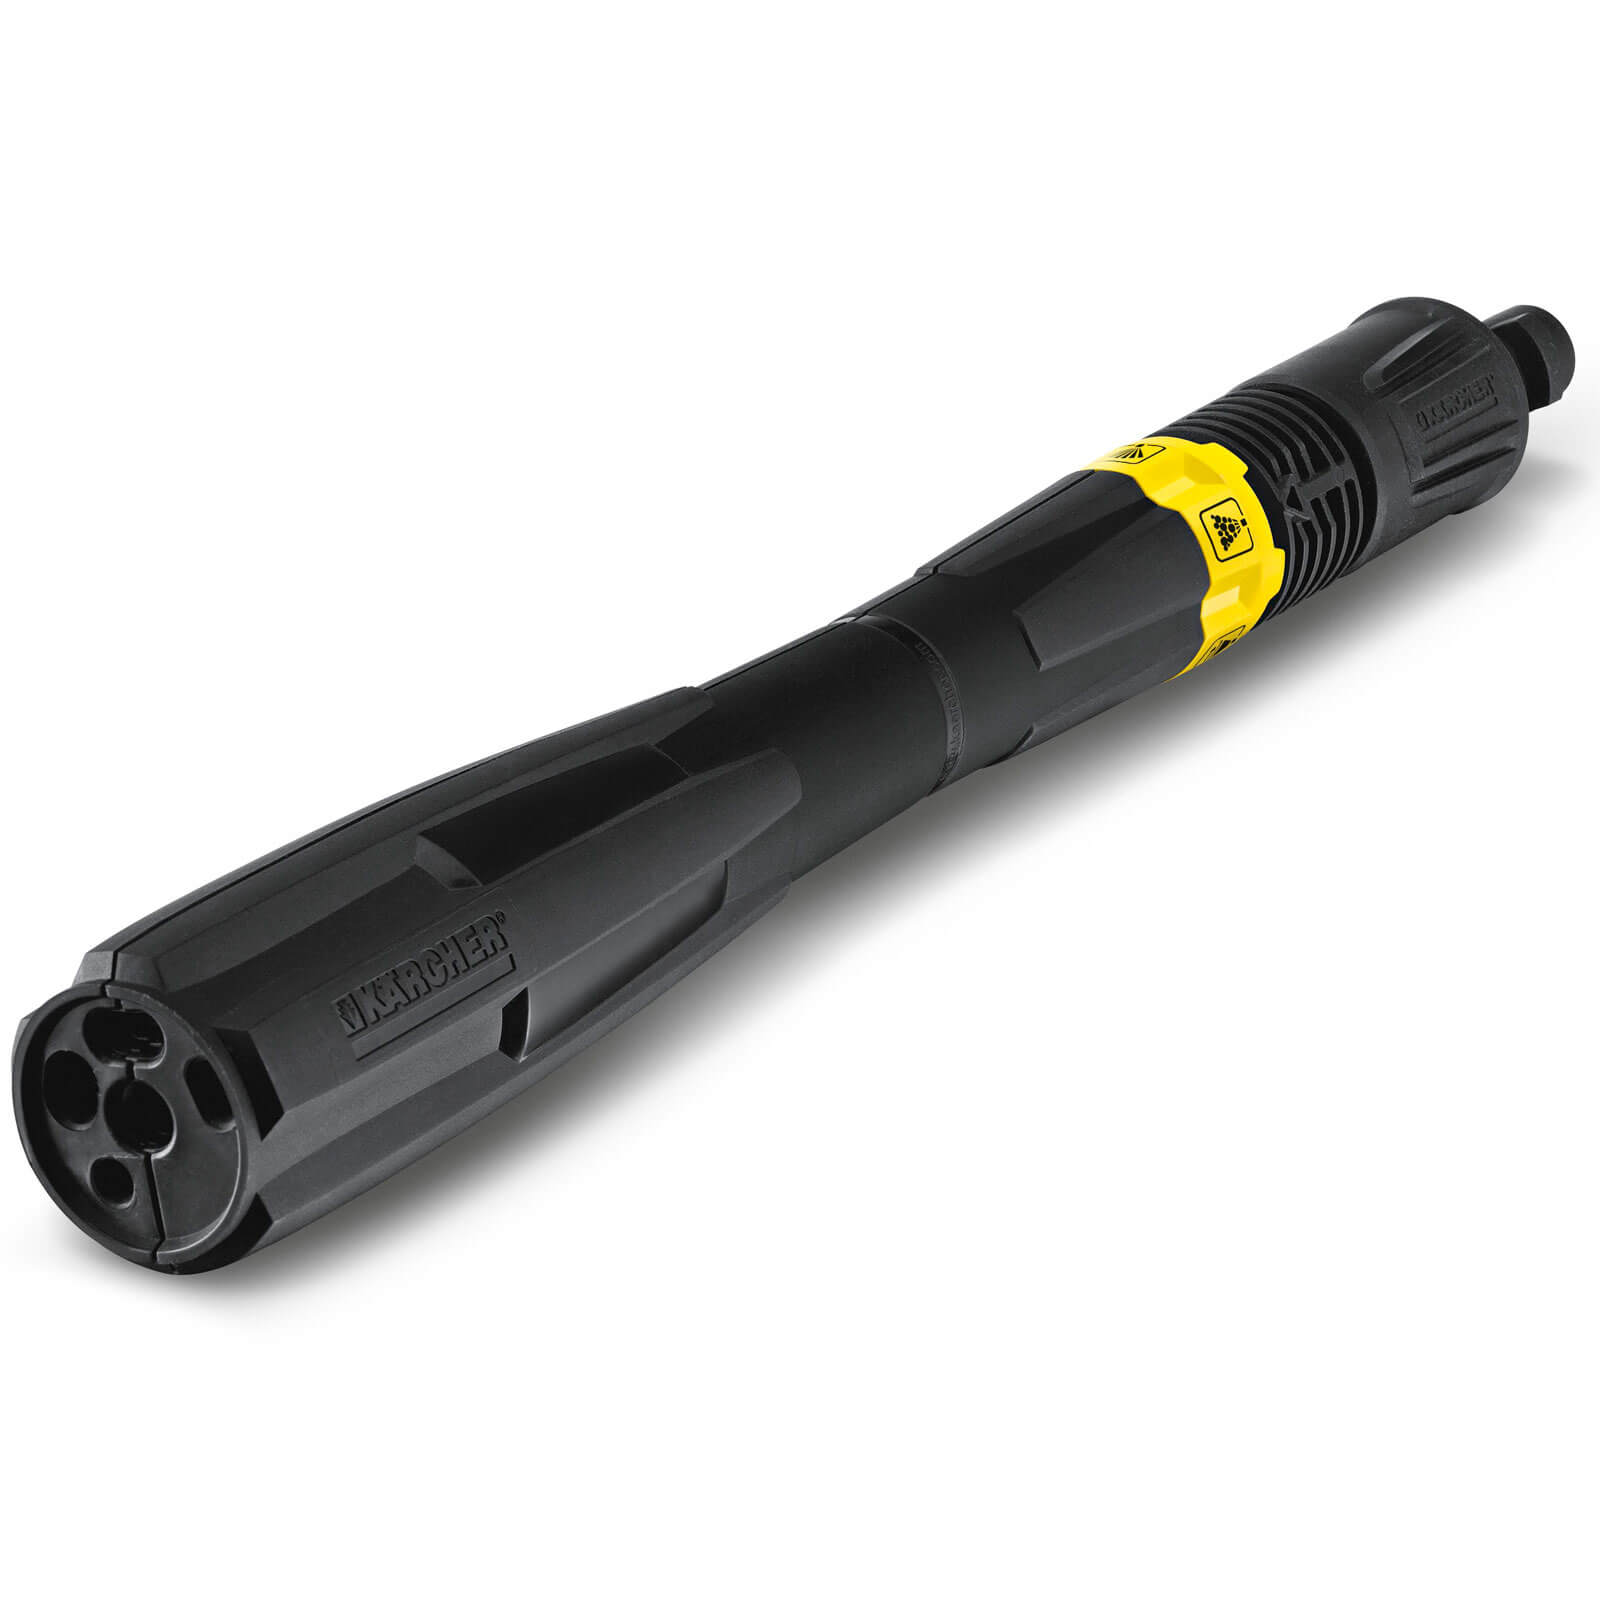 Photo of Karcher Mp 160 Multi Power Jet Nozzle For K7 Pressure Washers